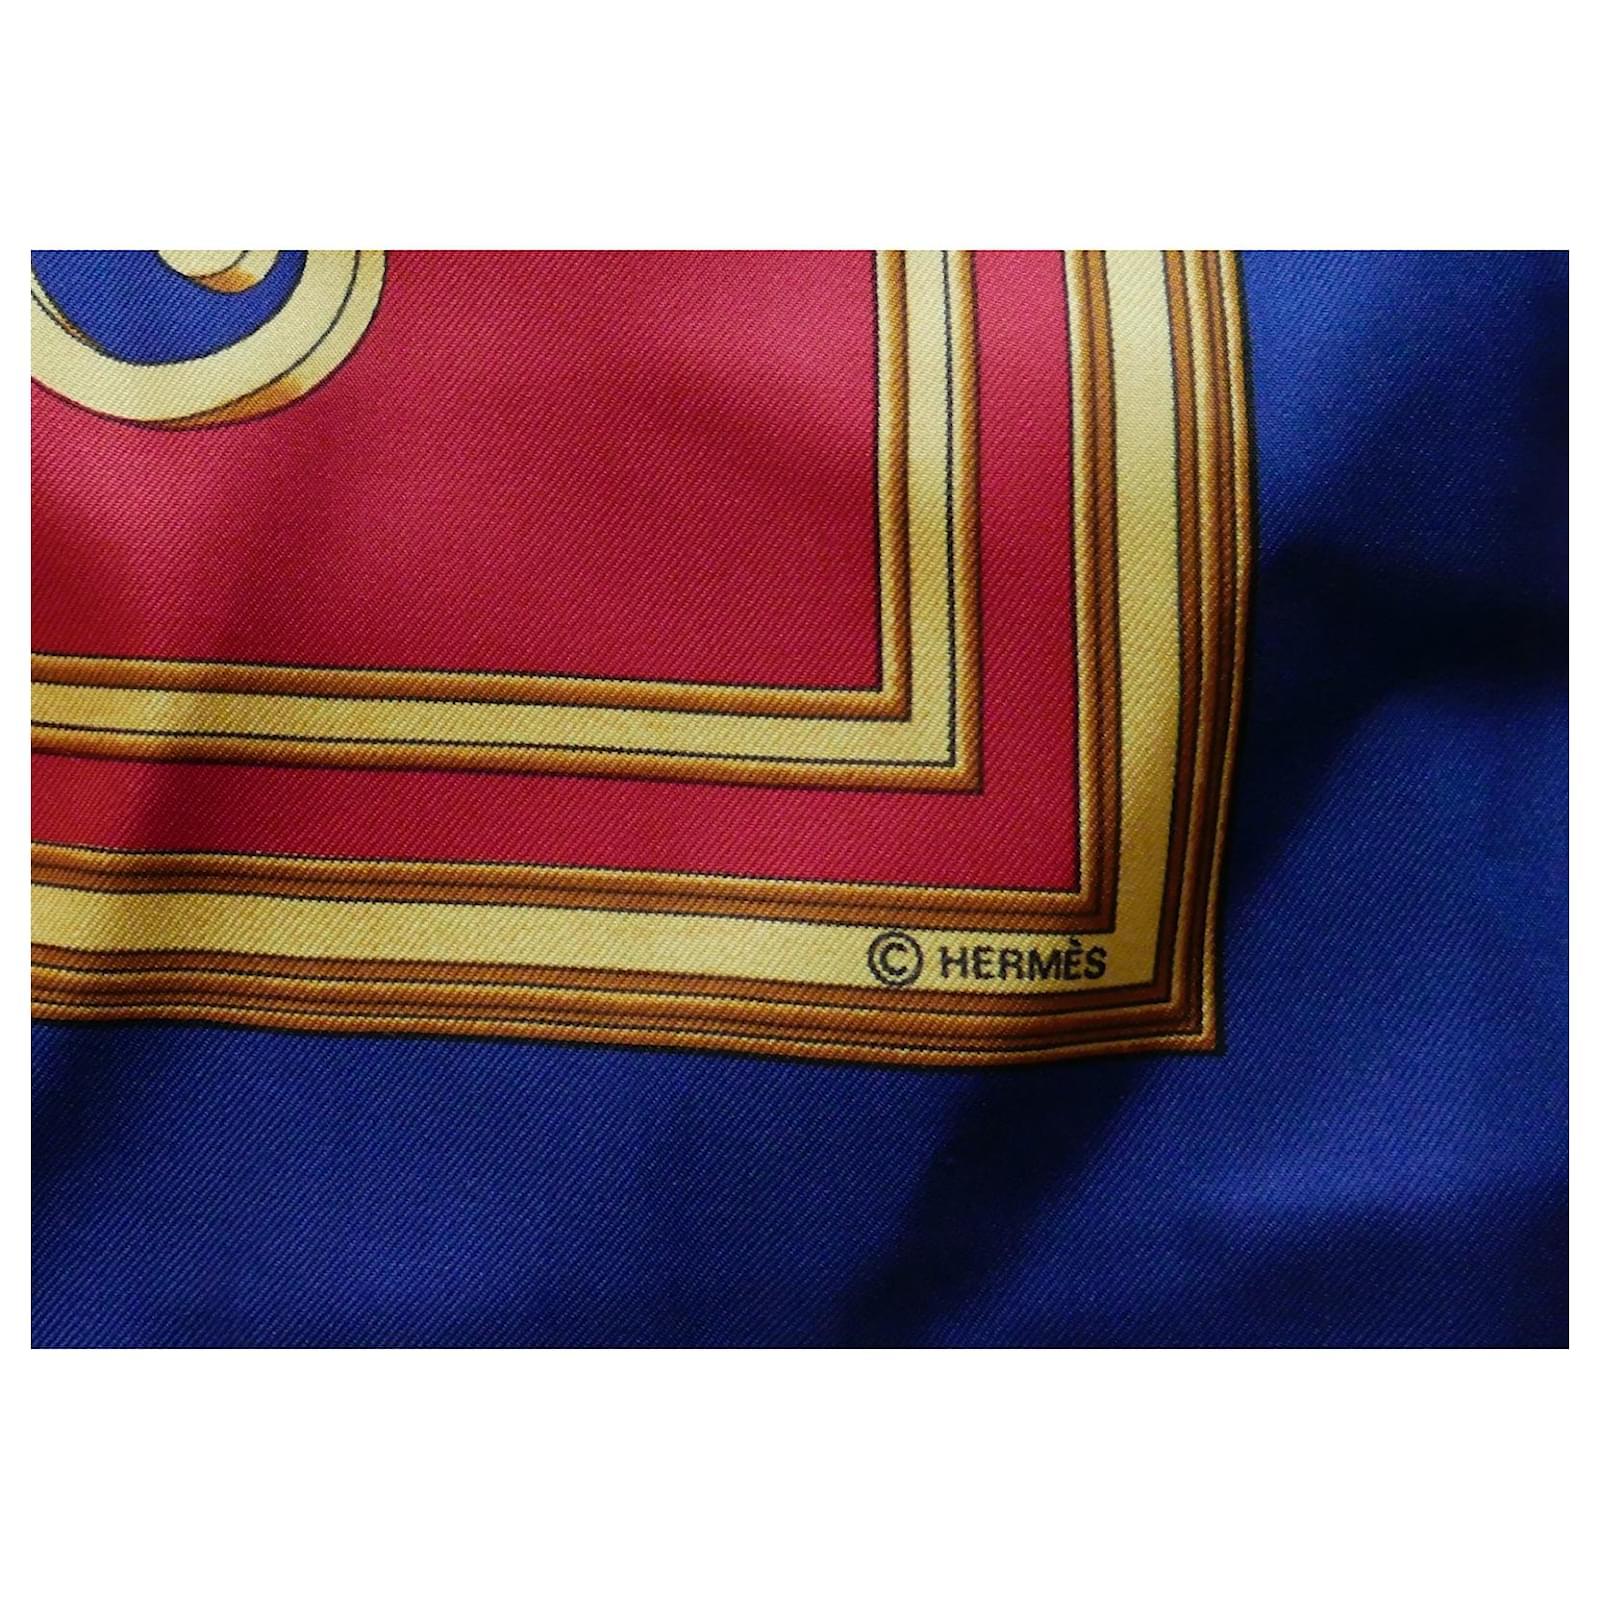 Hermes Les Tuileries Vintage Scarf Red Golden Navy w/Box In Excellent Condition For Sale In London, GB